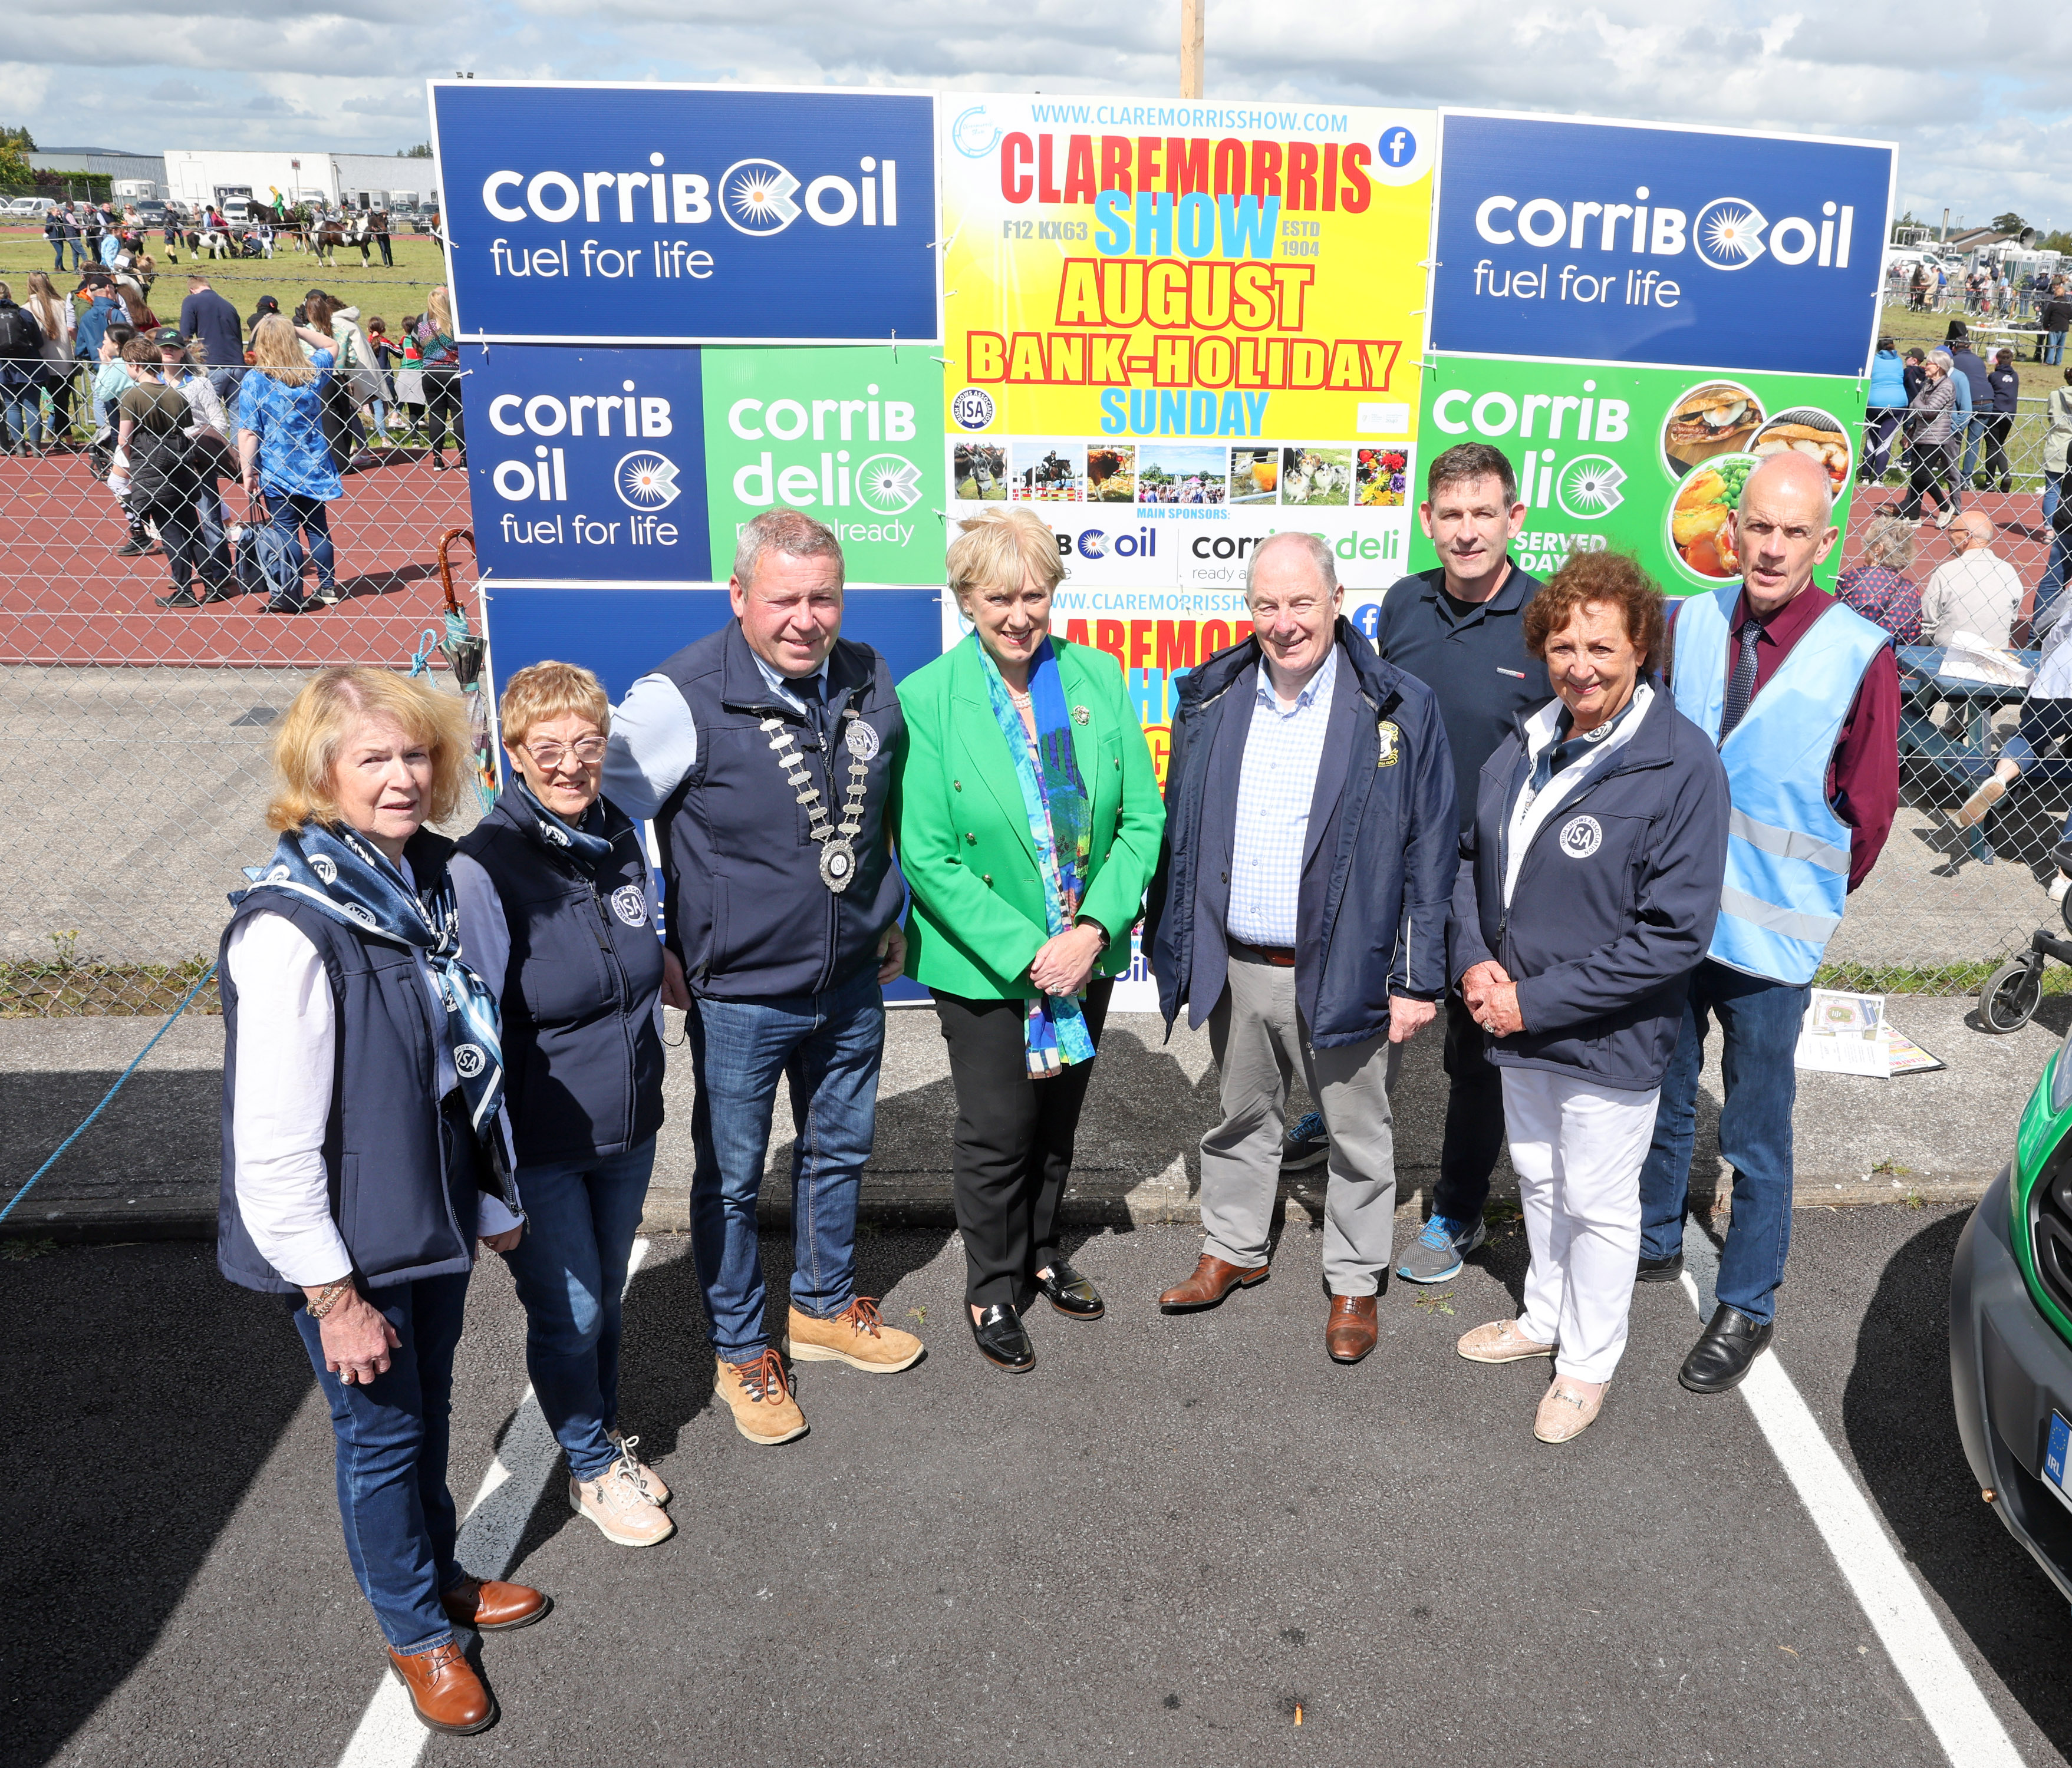 Minister for Social Protection and Rural & Community Development Heather Humphreys TD (centre) pictured at Claremorris 103rd Show with from left: Ann O'Malley, ISA; Catherine Gallagher, ISA; Ray Brady, President ISA; Deputy  Michael Ring T.D.;  Tommy Conway Corrib Oil (sponsors); Freda Kinnarney ISA  Eastern Regional Chairperson & National Vice-President, and Michael McGrath, Vice-chairman and Treasurer Claremorris Show 2023l